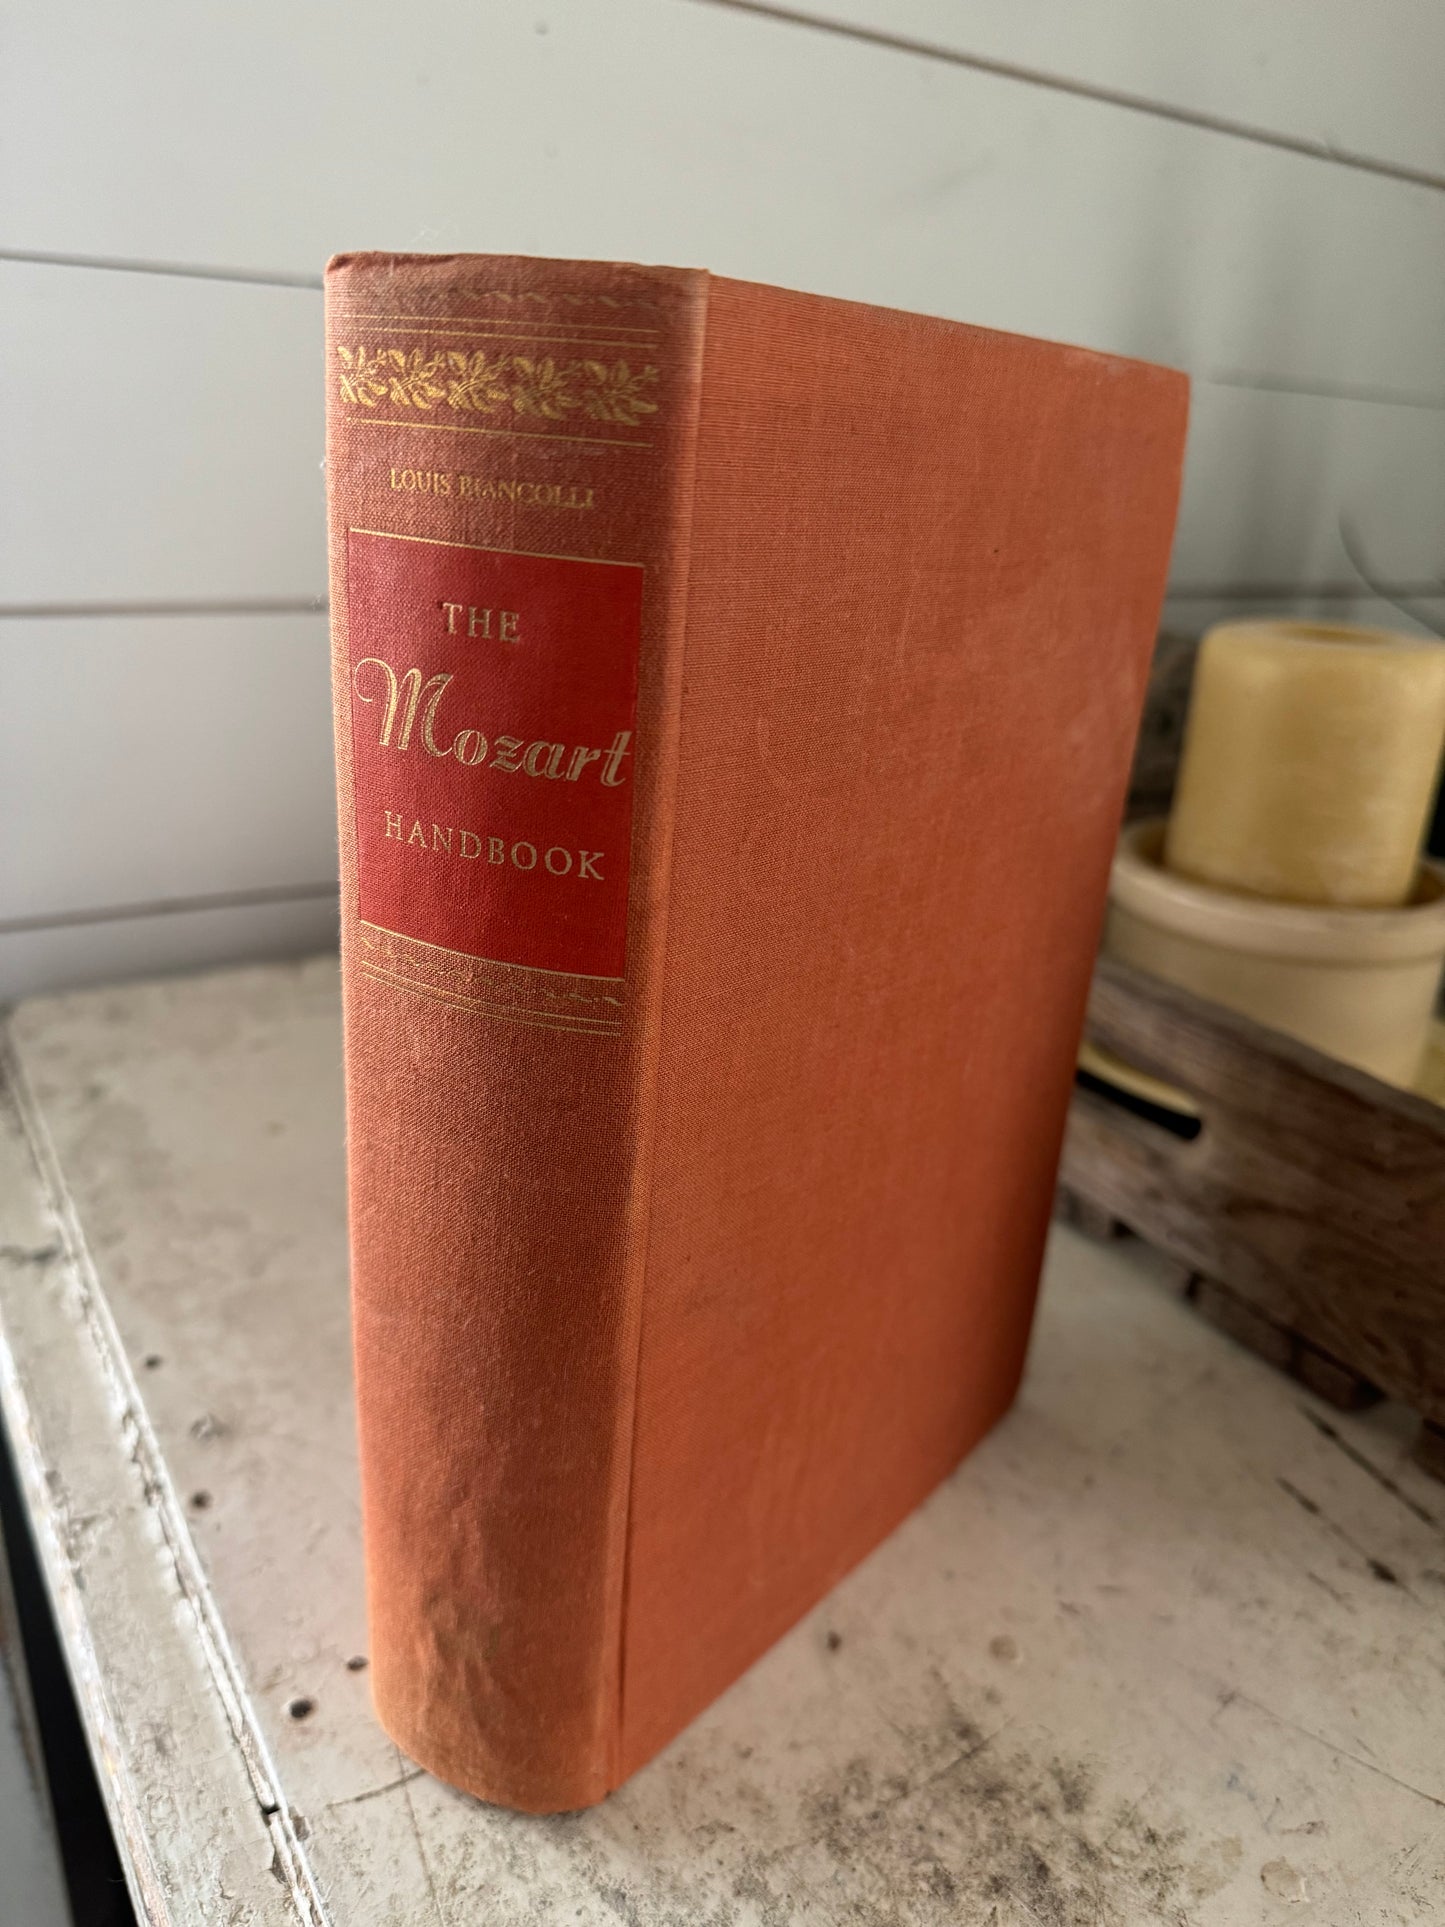 The Mozart Handbook:A Guide to the Man and His Music by Louis Biancolli